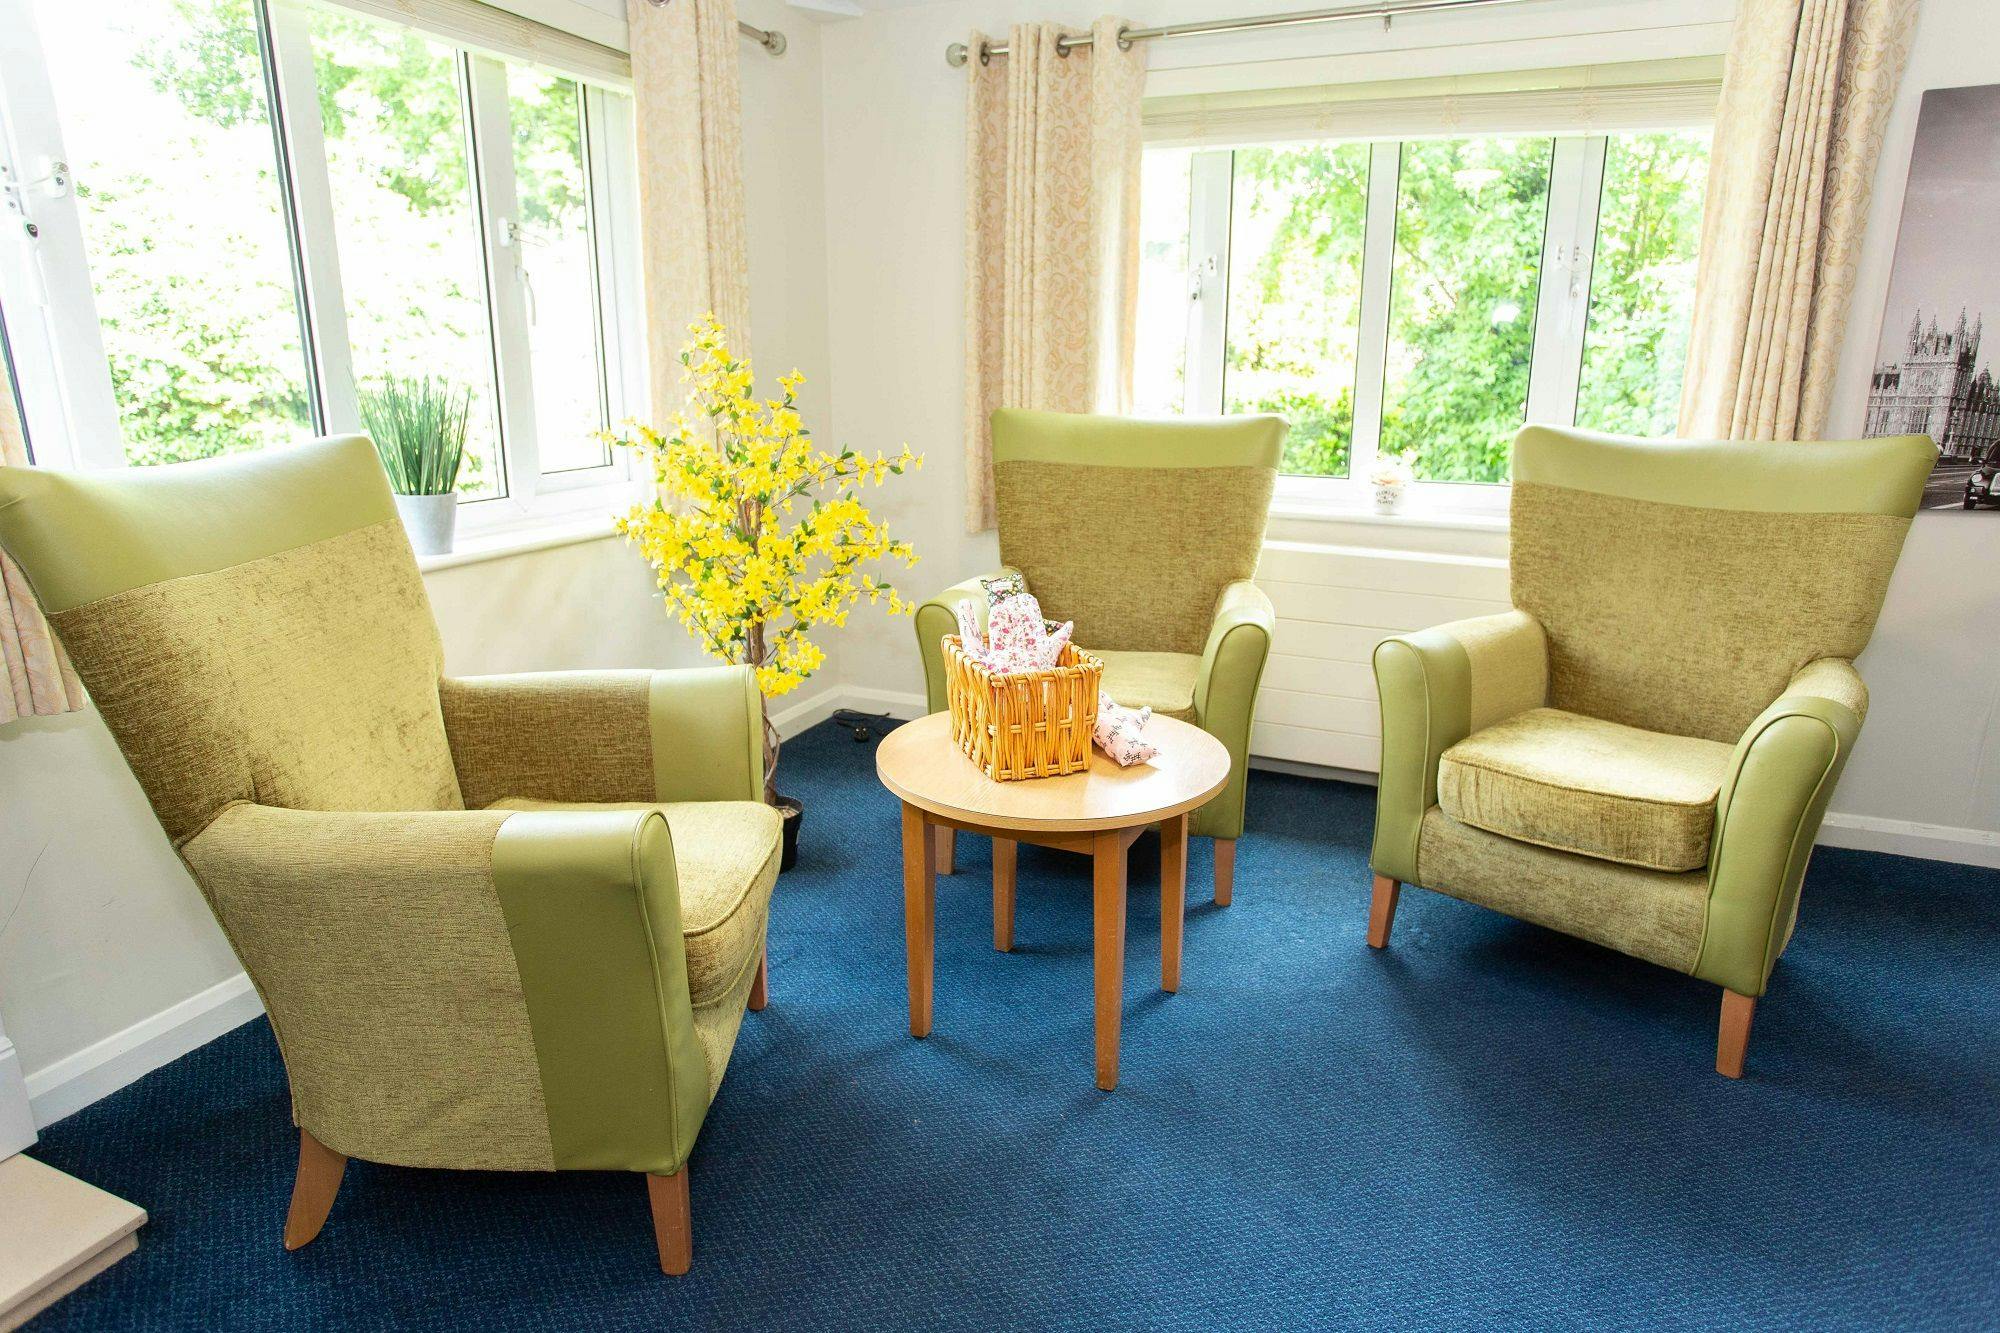 Communal Area at Providence Court care Home in Baldock, Hertfordshire